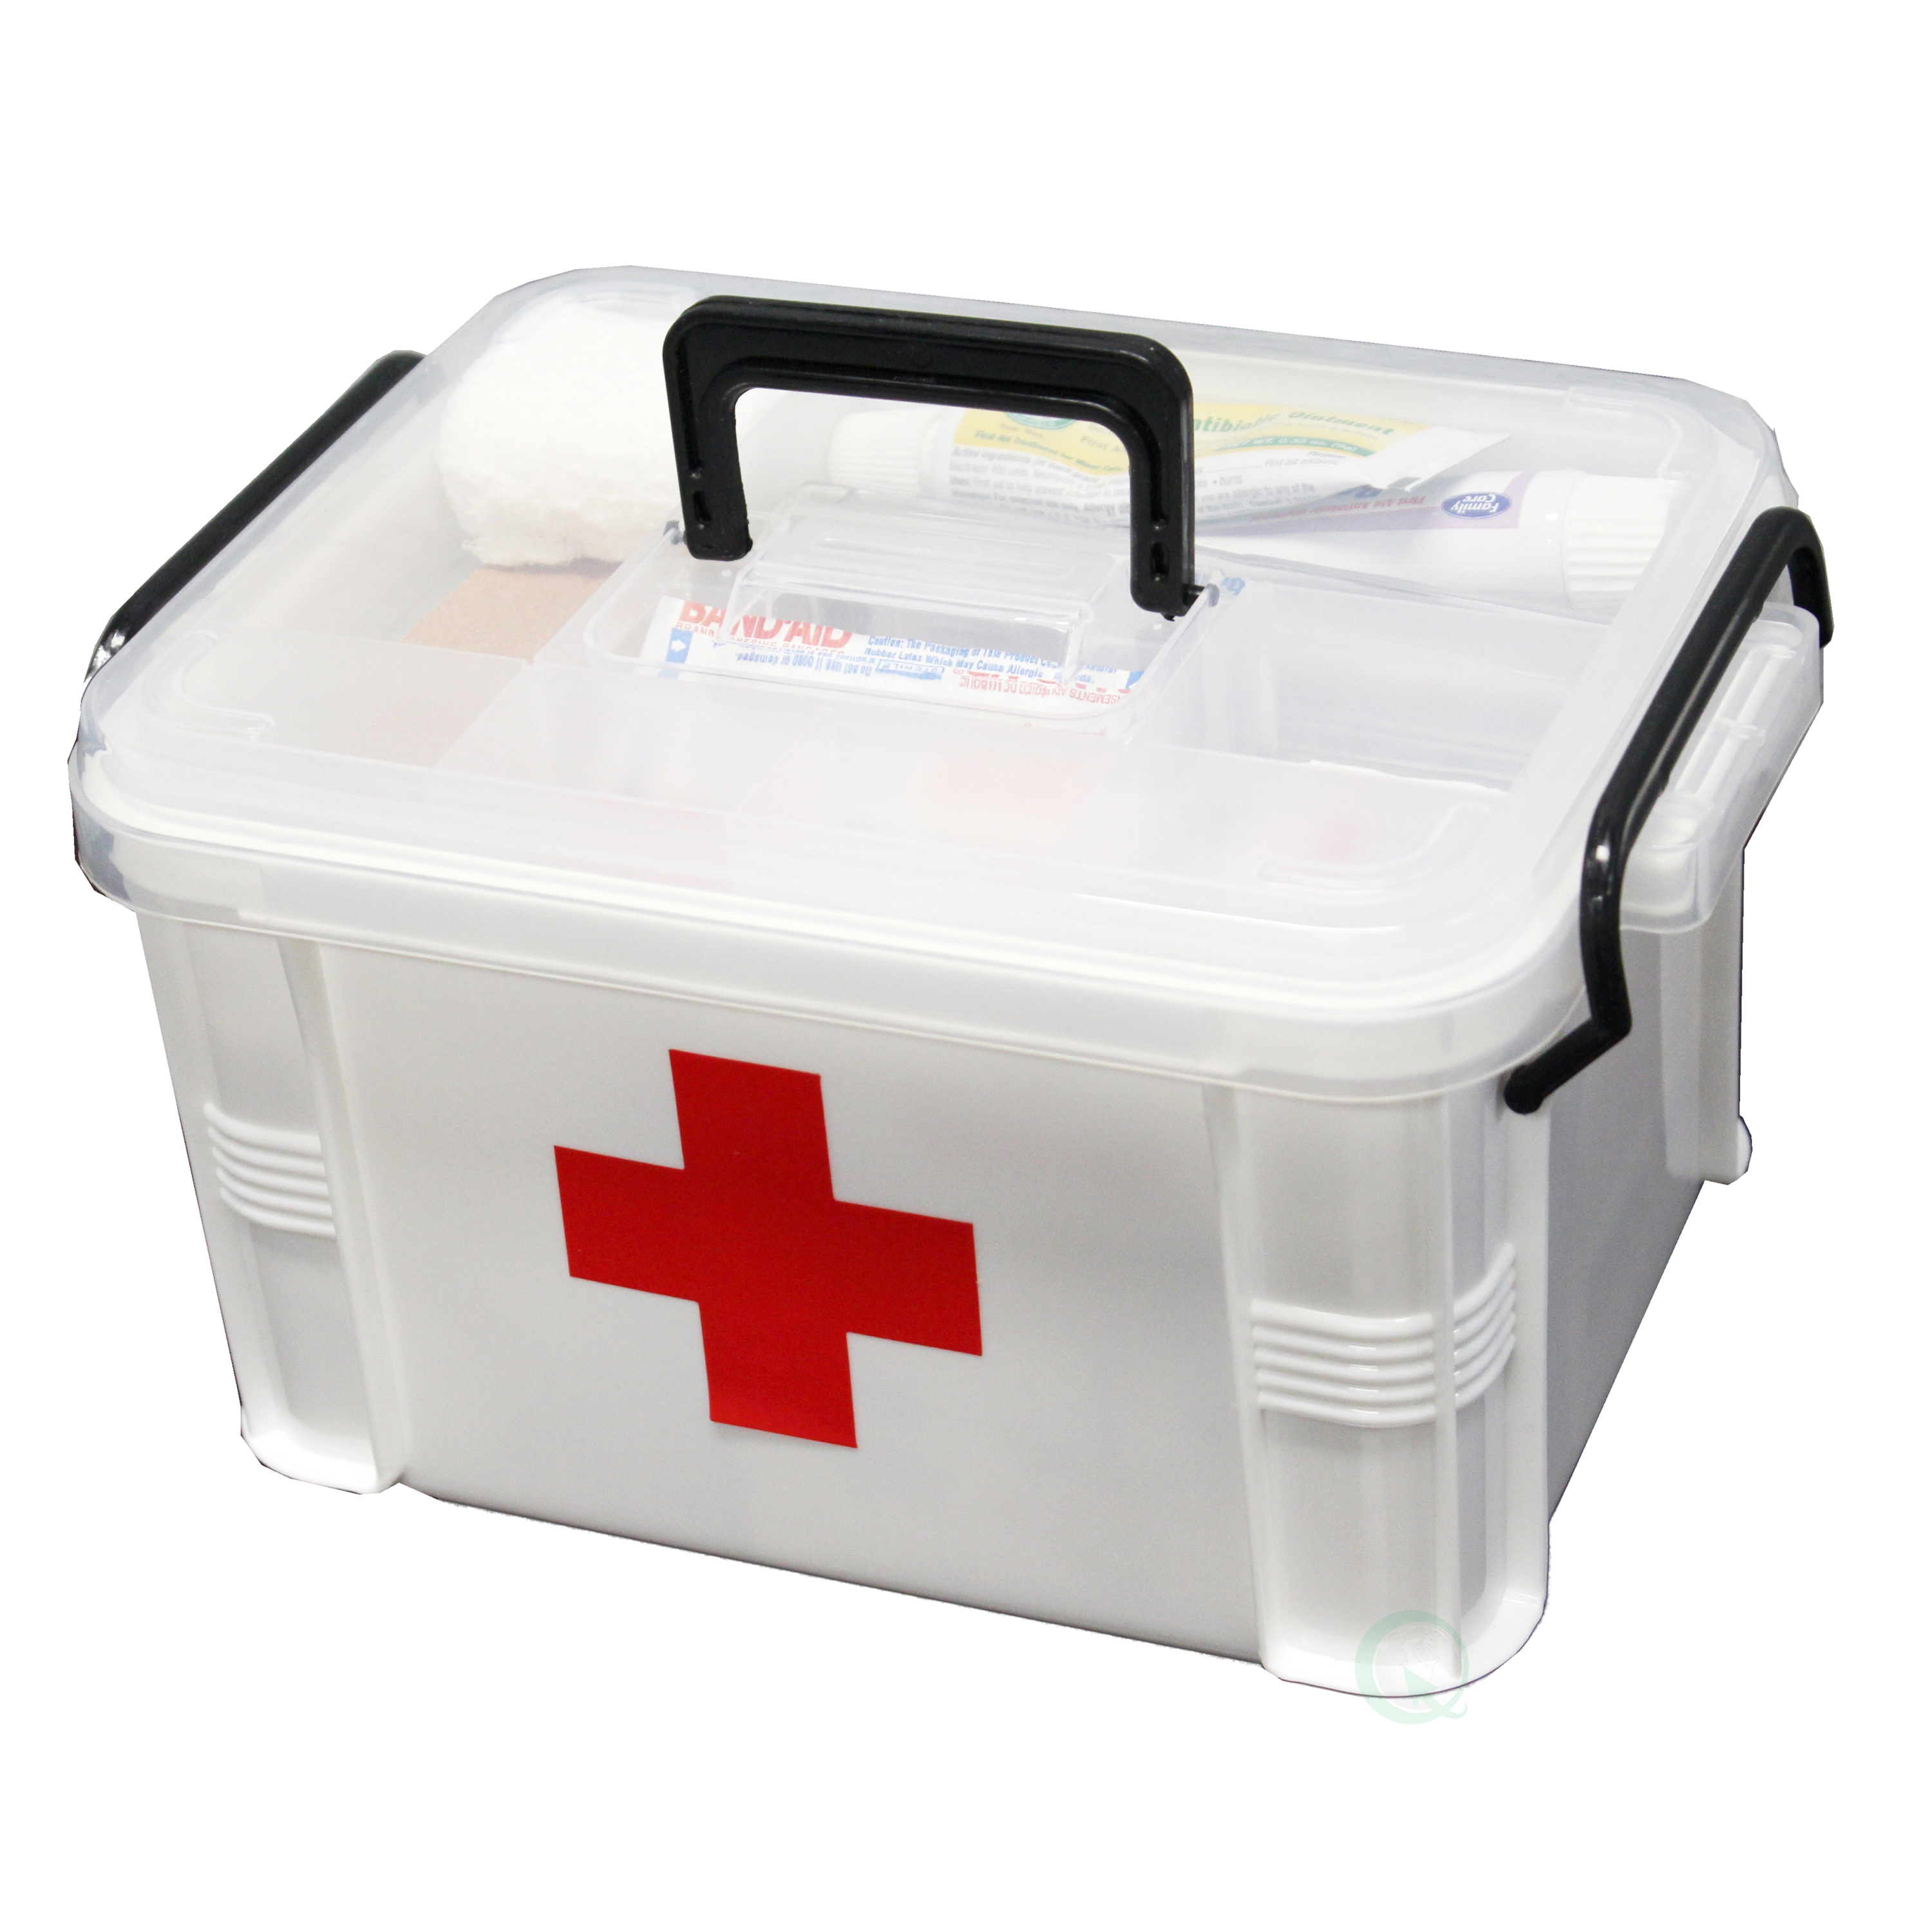 First Aid Medical Kit - Small